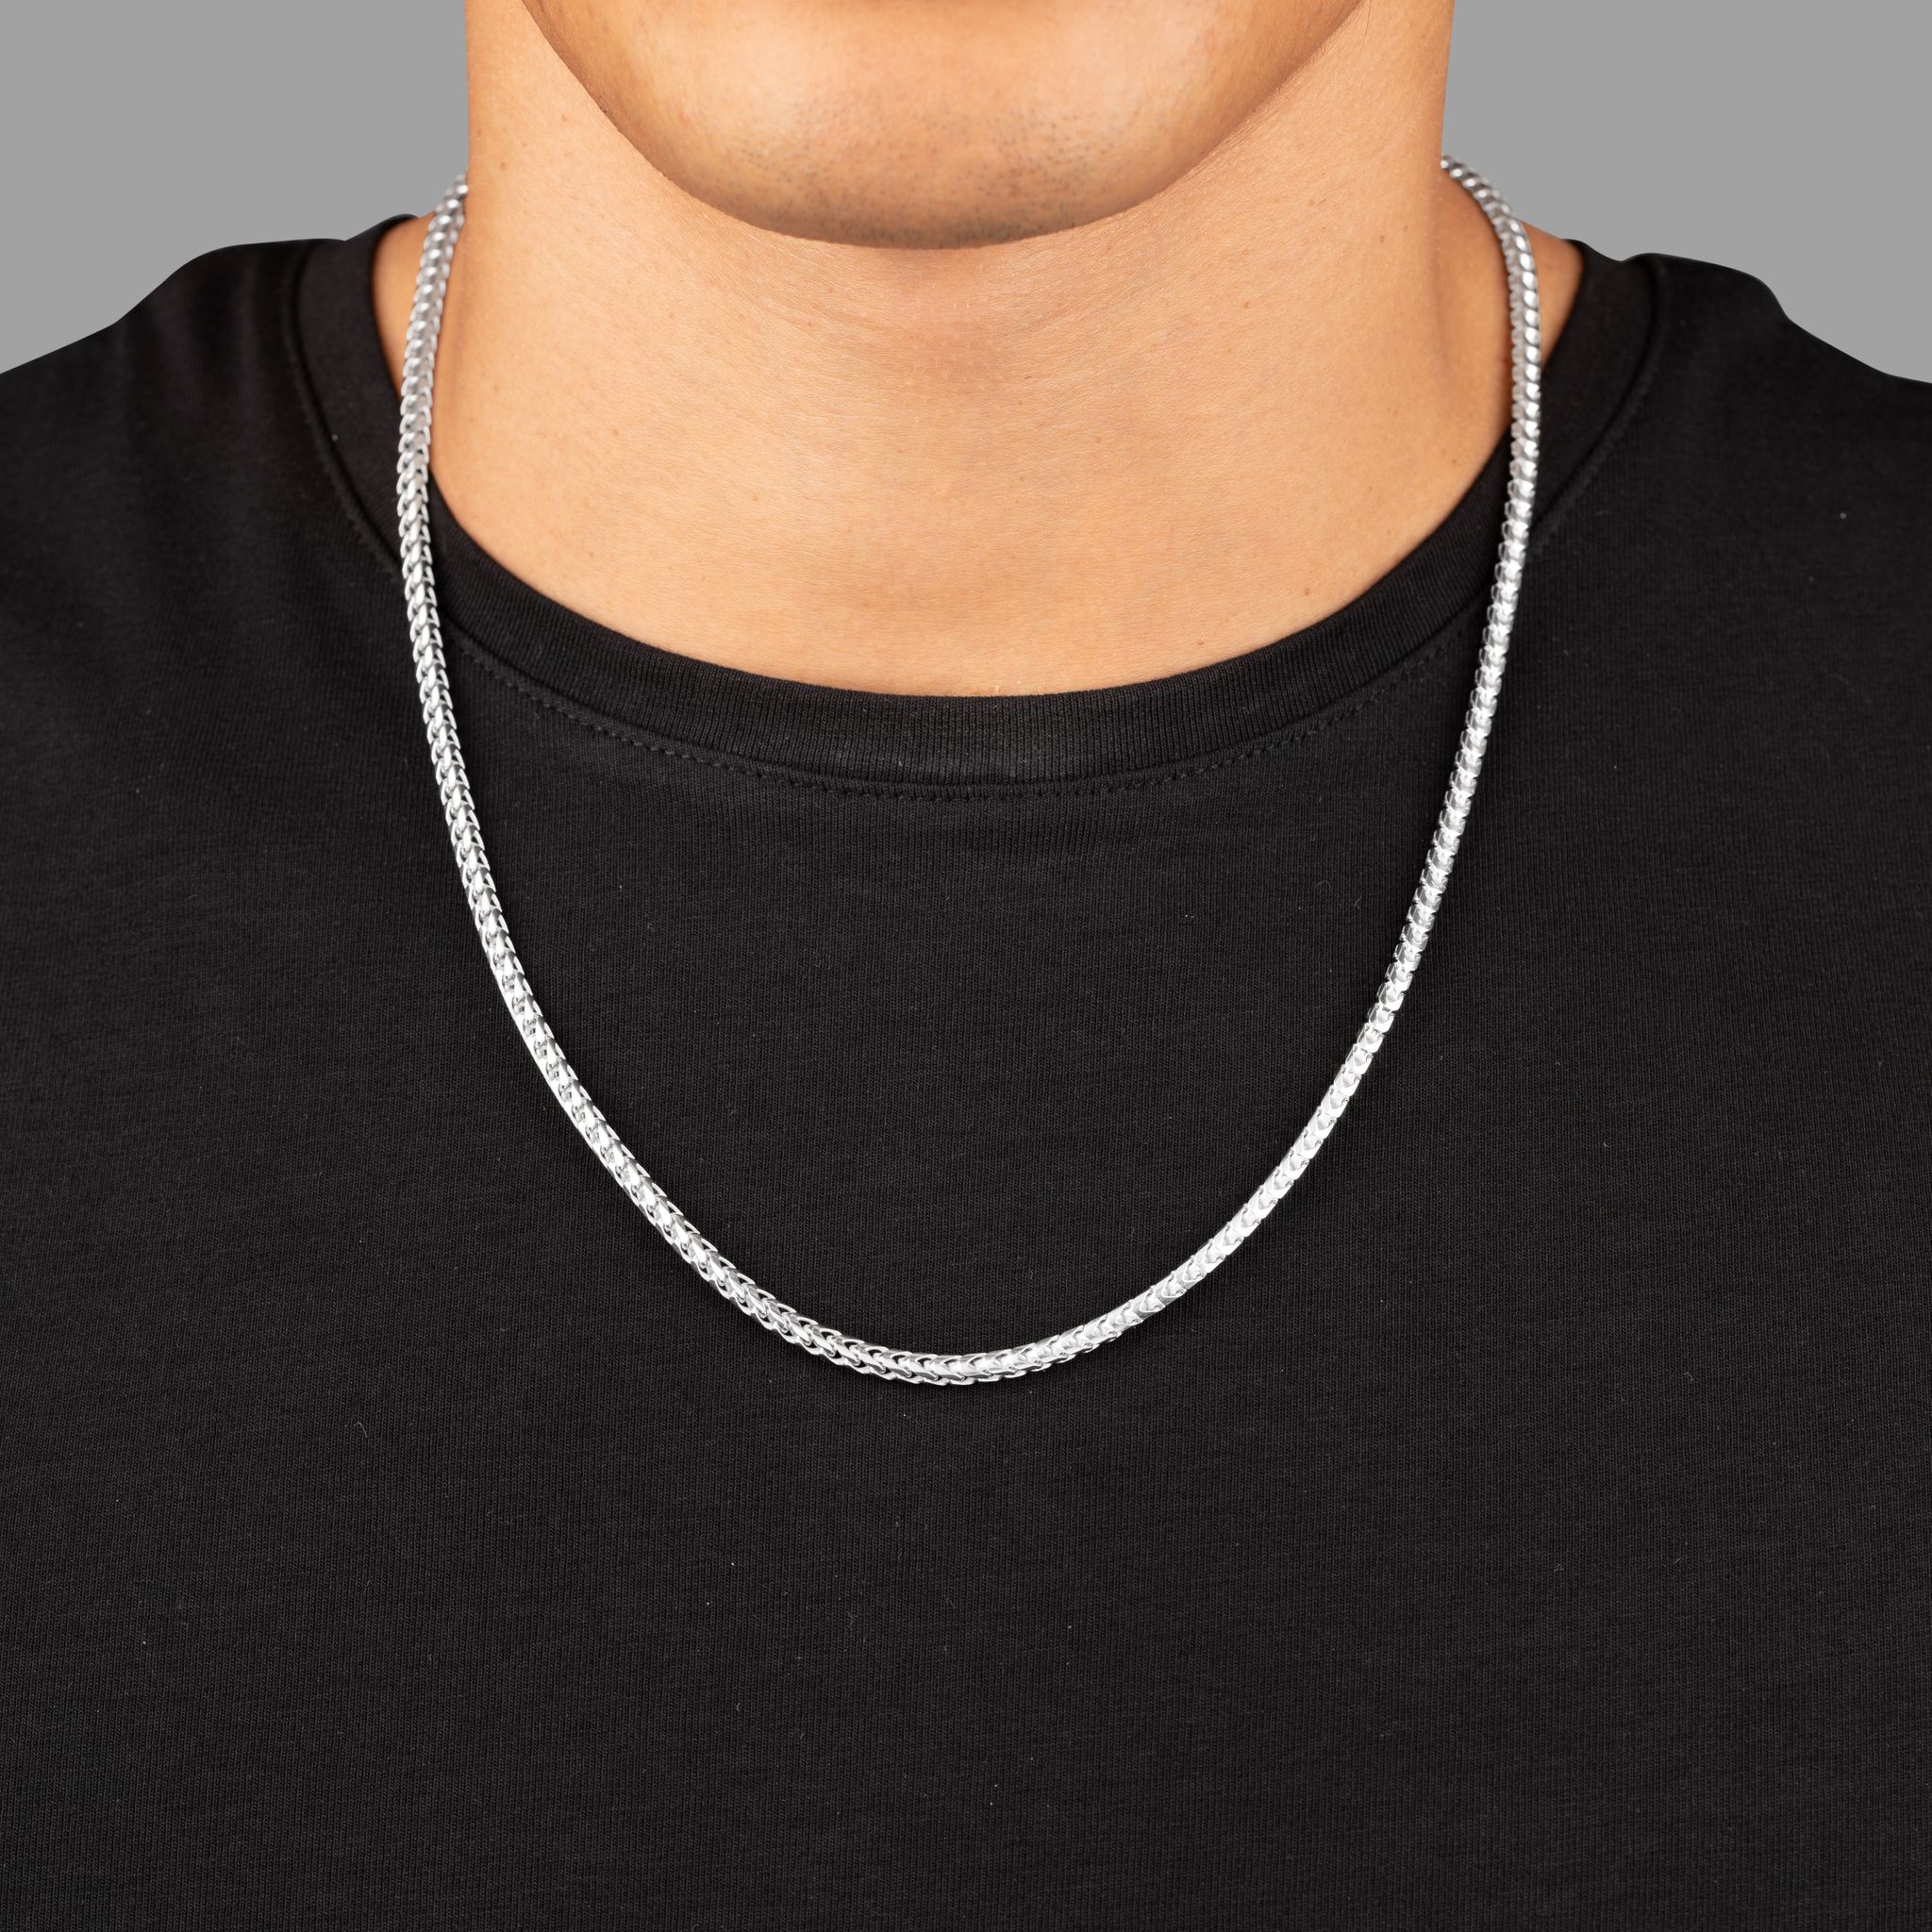 3mm Silver Franco Chain, Silver Chain for Men, Proclamation Jewelry